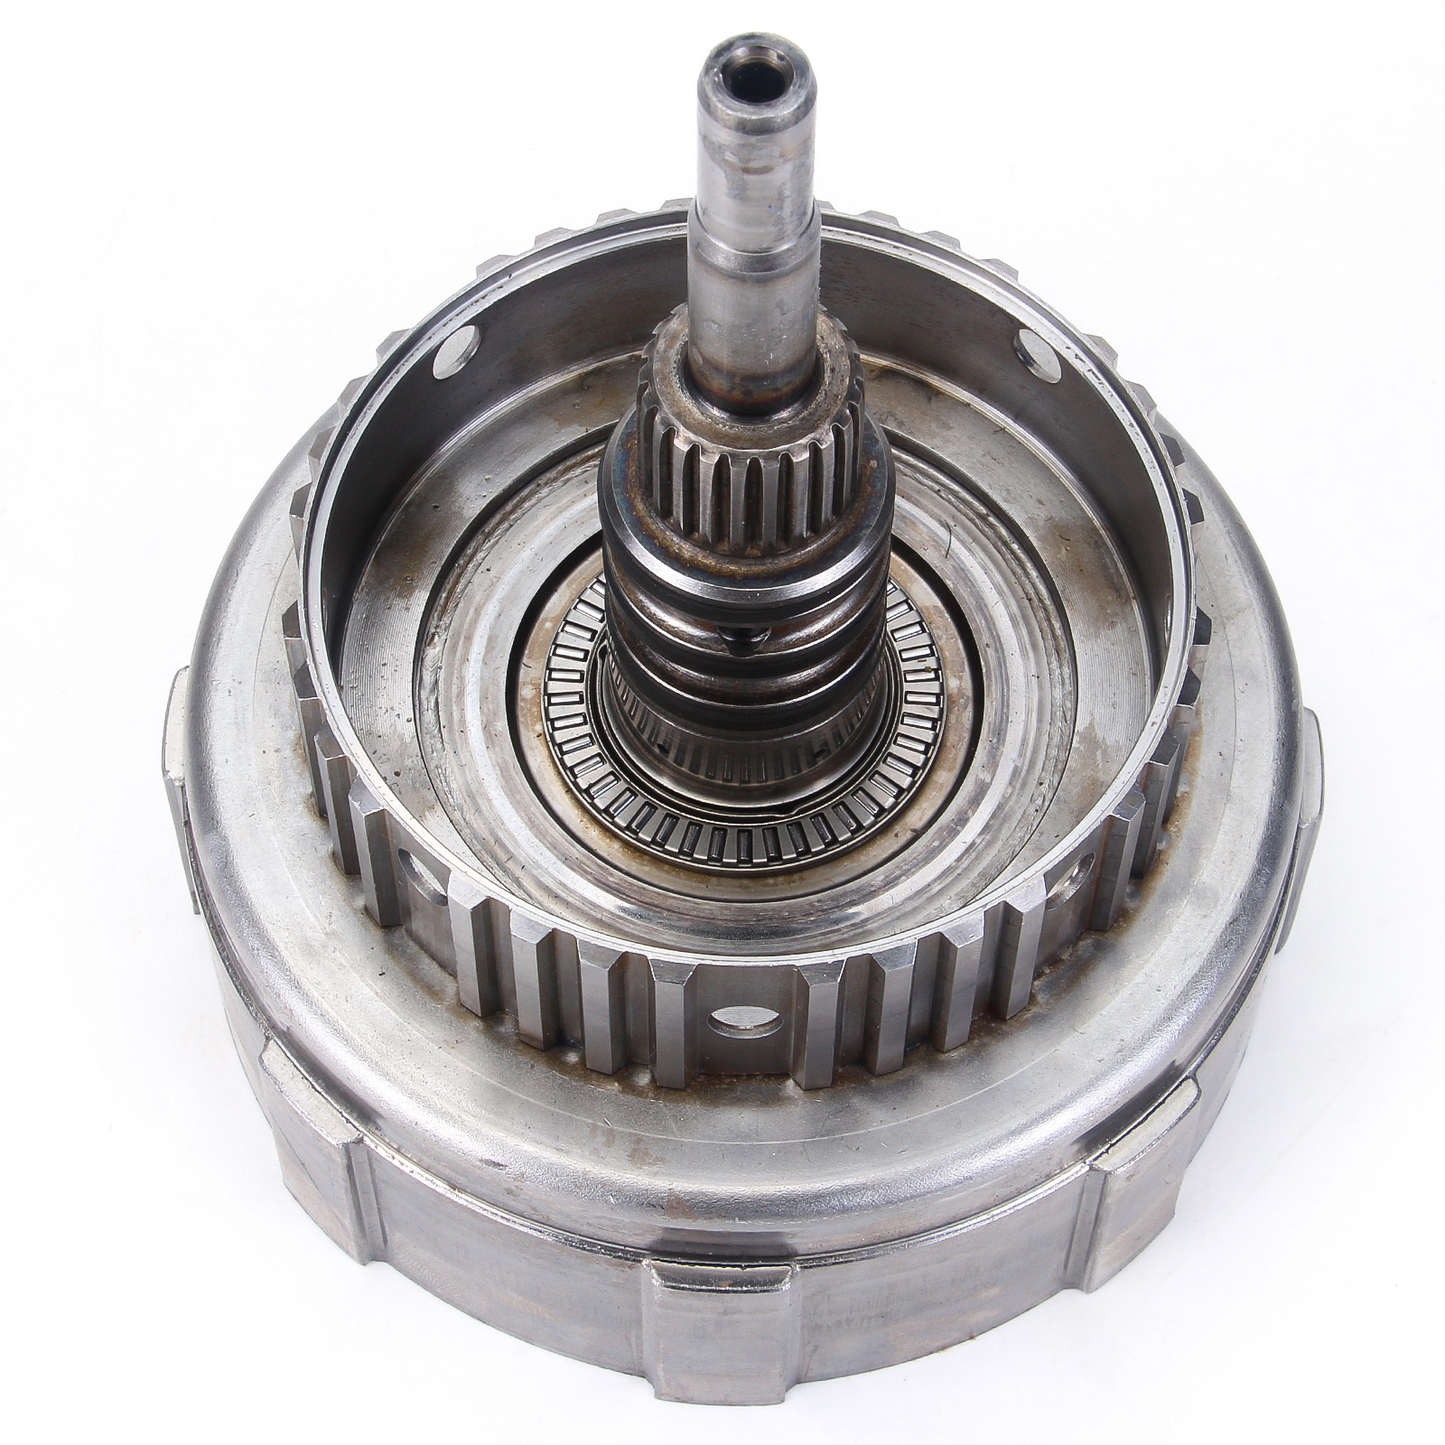 A343E A343F A340E A340 30-43LE Automatic Transmission Gearbox Input Shaft and Input Drum for TOYOTA 2700 HYUNDAI